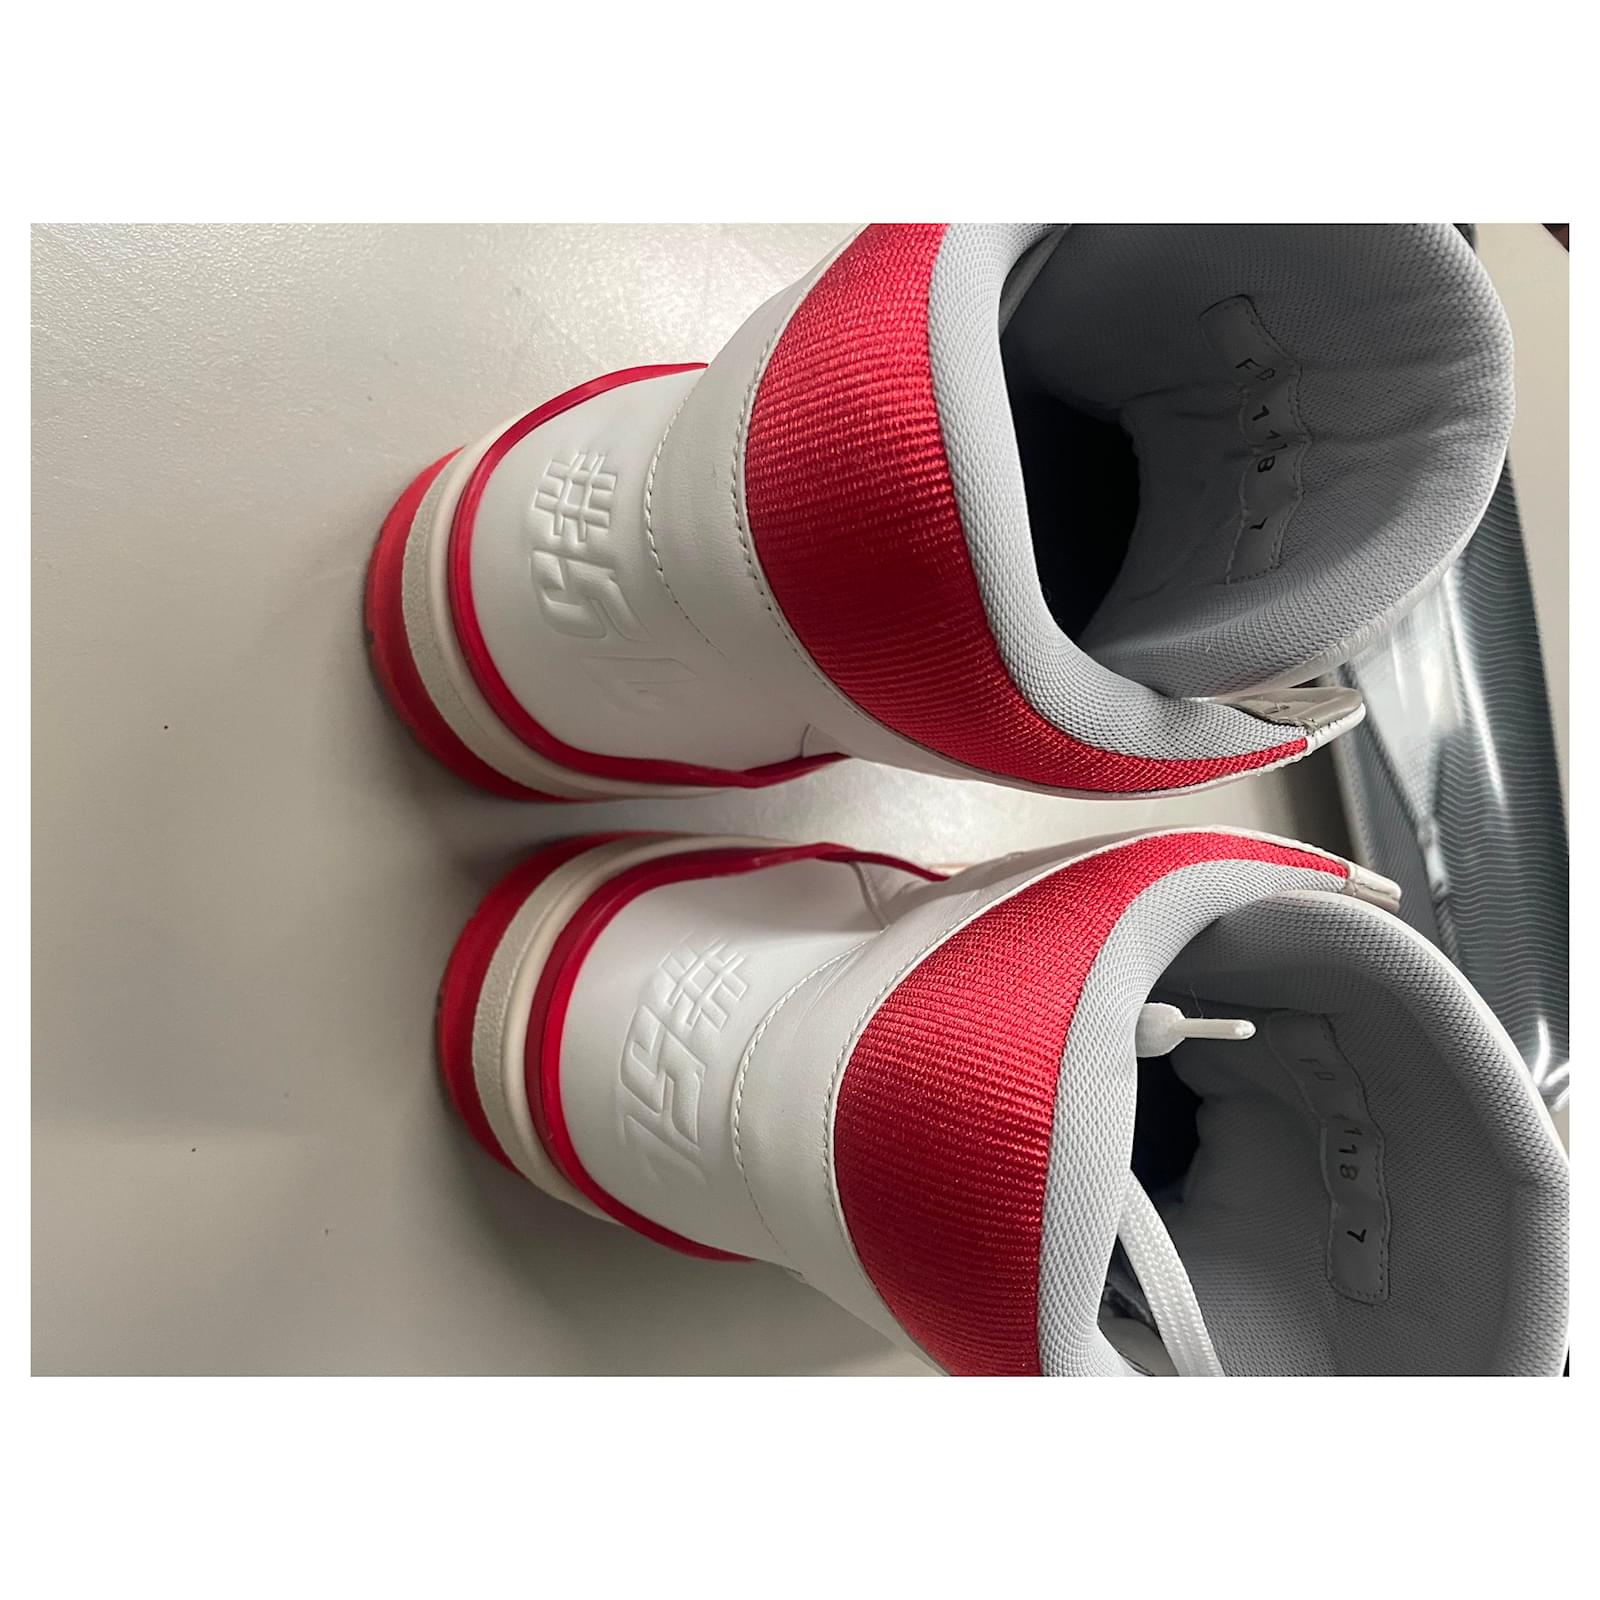 Virgil Abloh Designed and Signed Louis Vuitton 'LV I (RED) Trainer